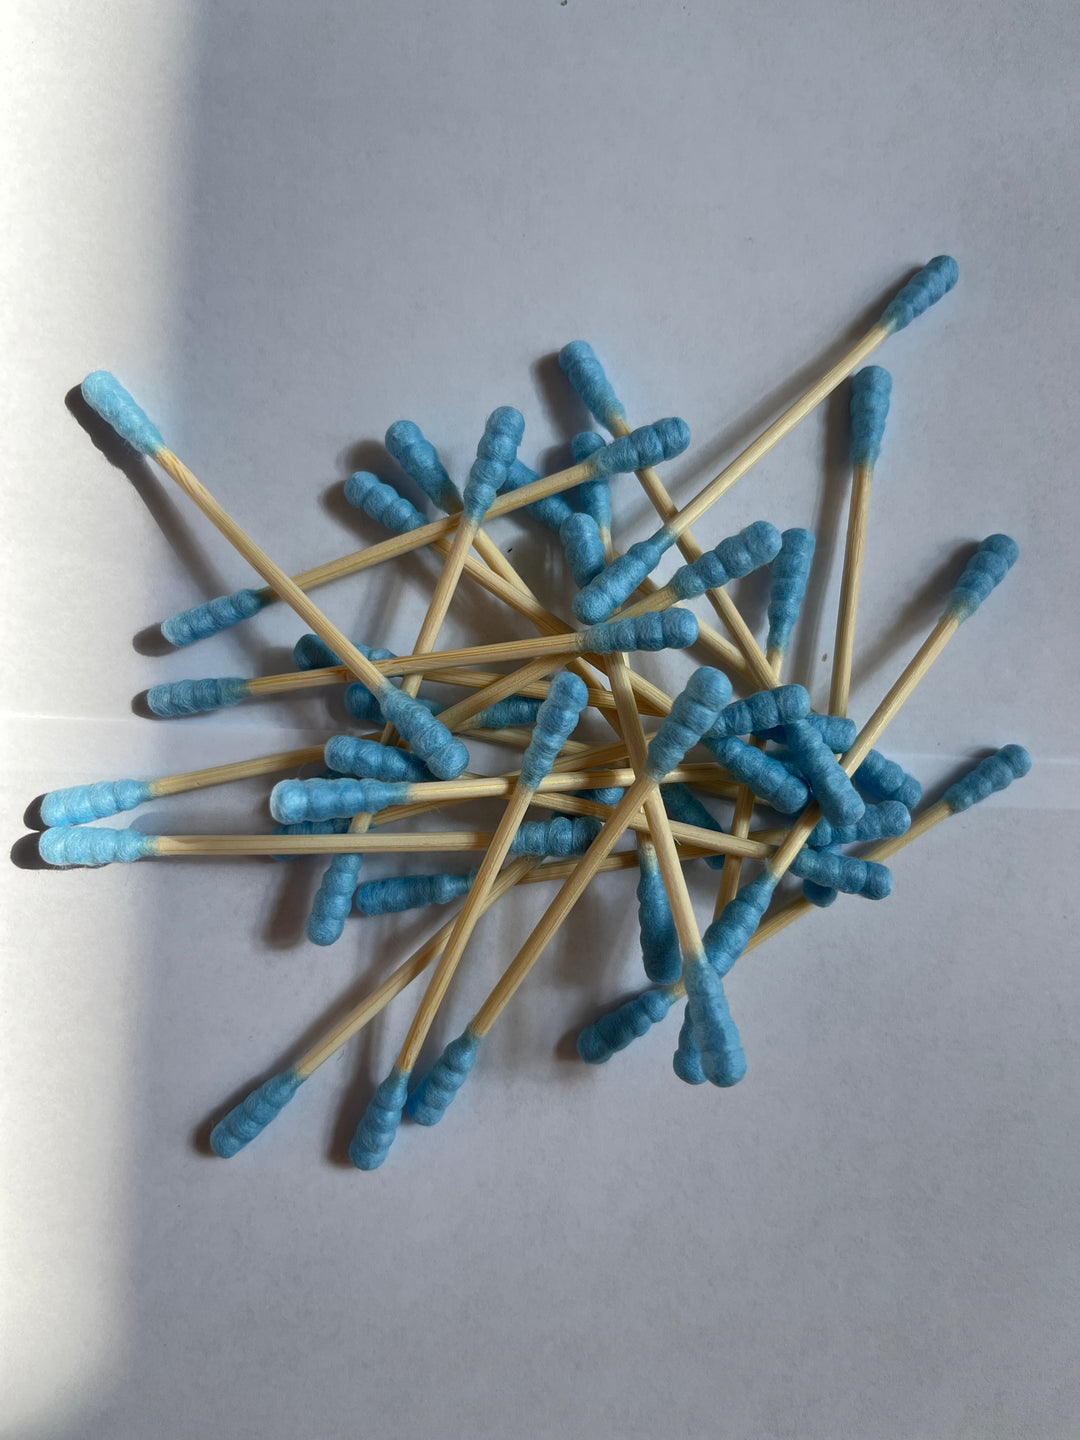 Arkive Package-Free Blue + Rippled Cotton Swabs